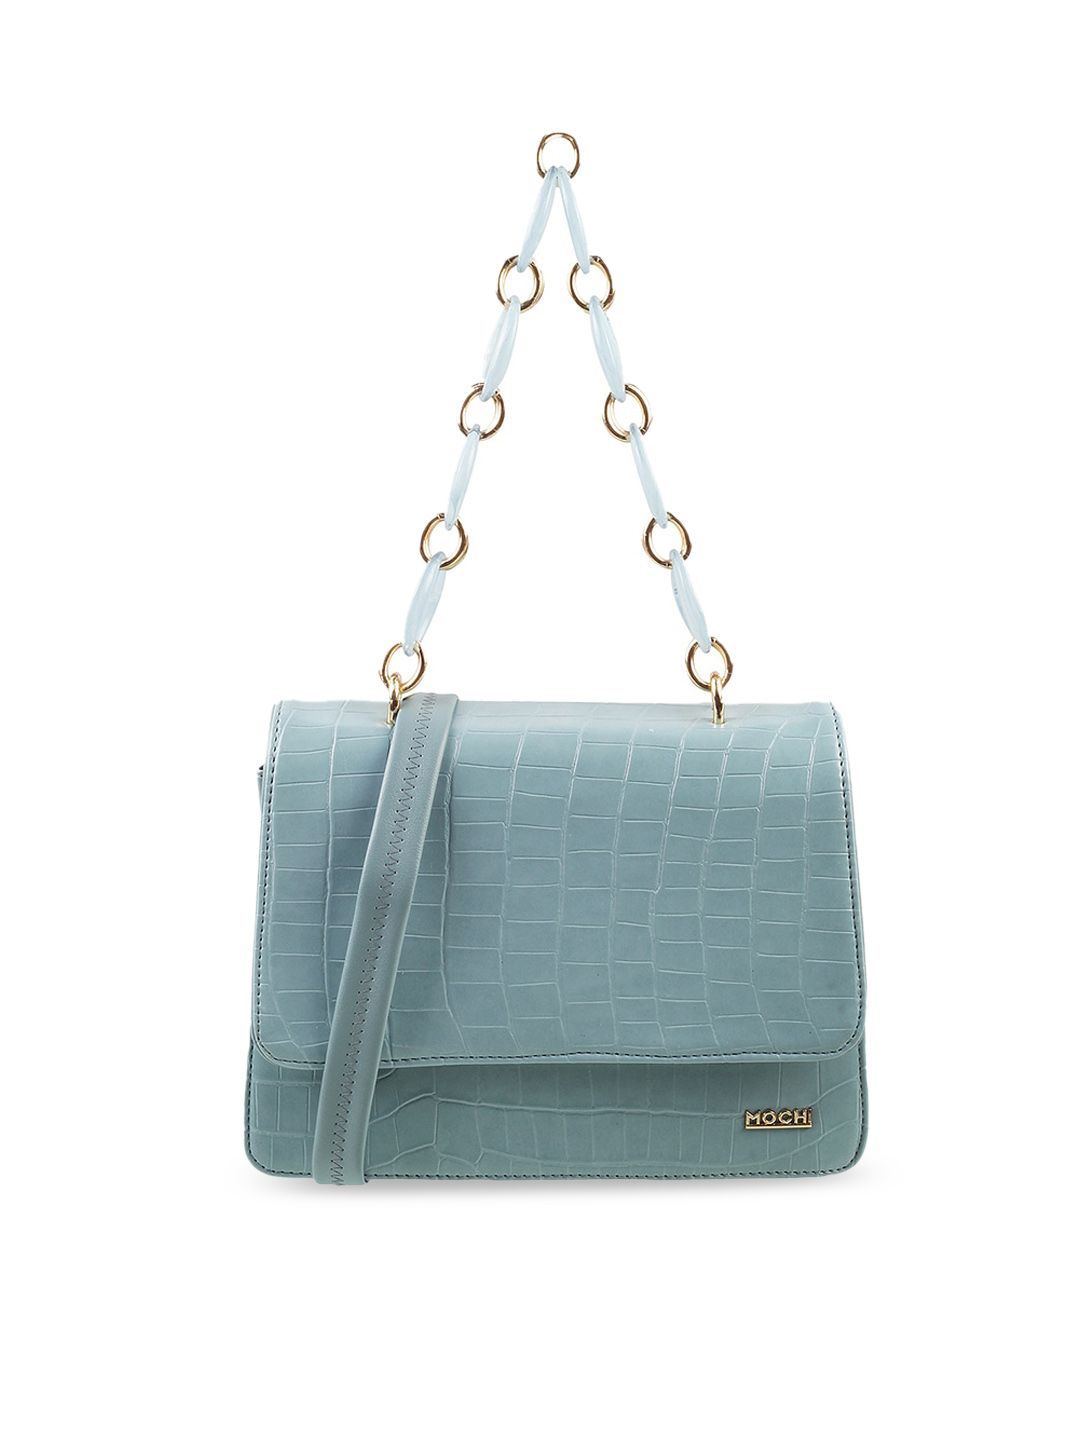 Mochi Blue Textured Swagger Handheld Bag Price in India